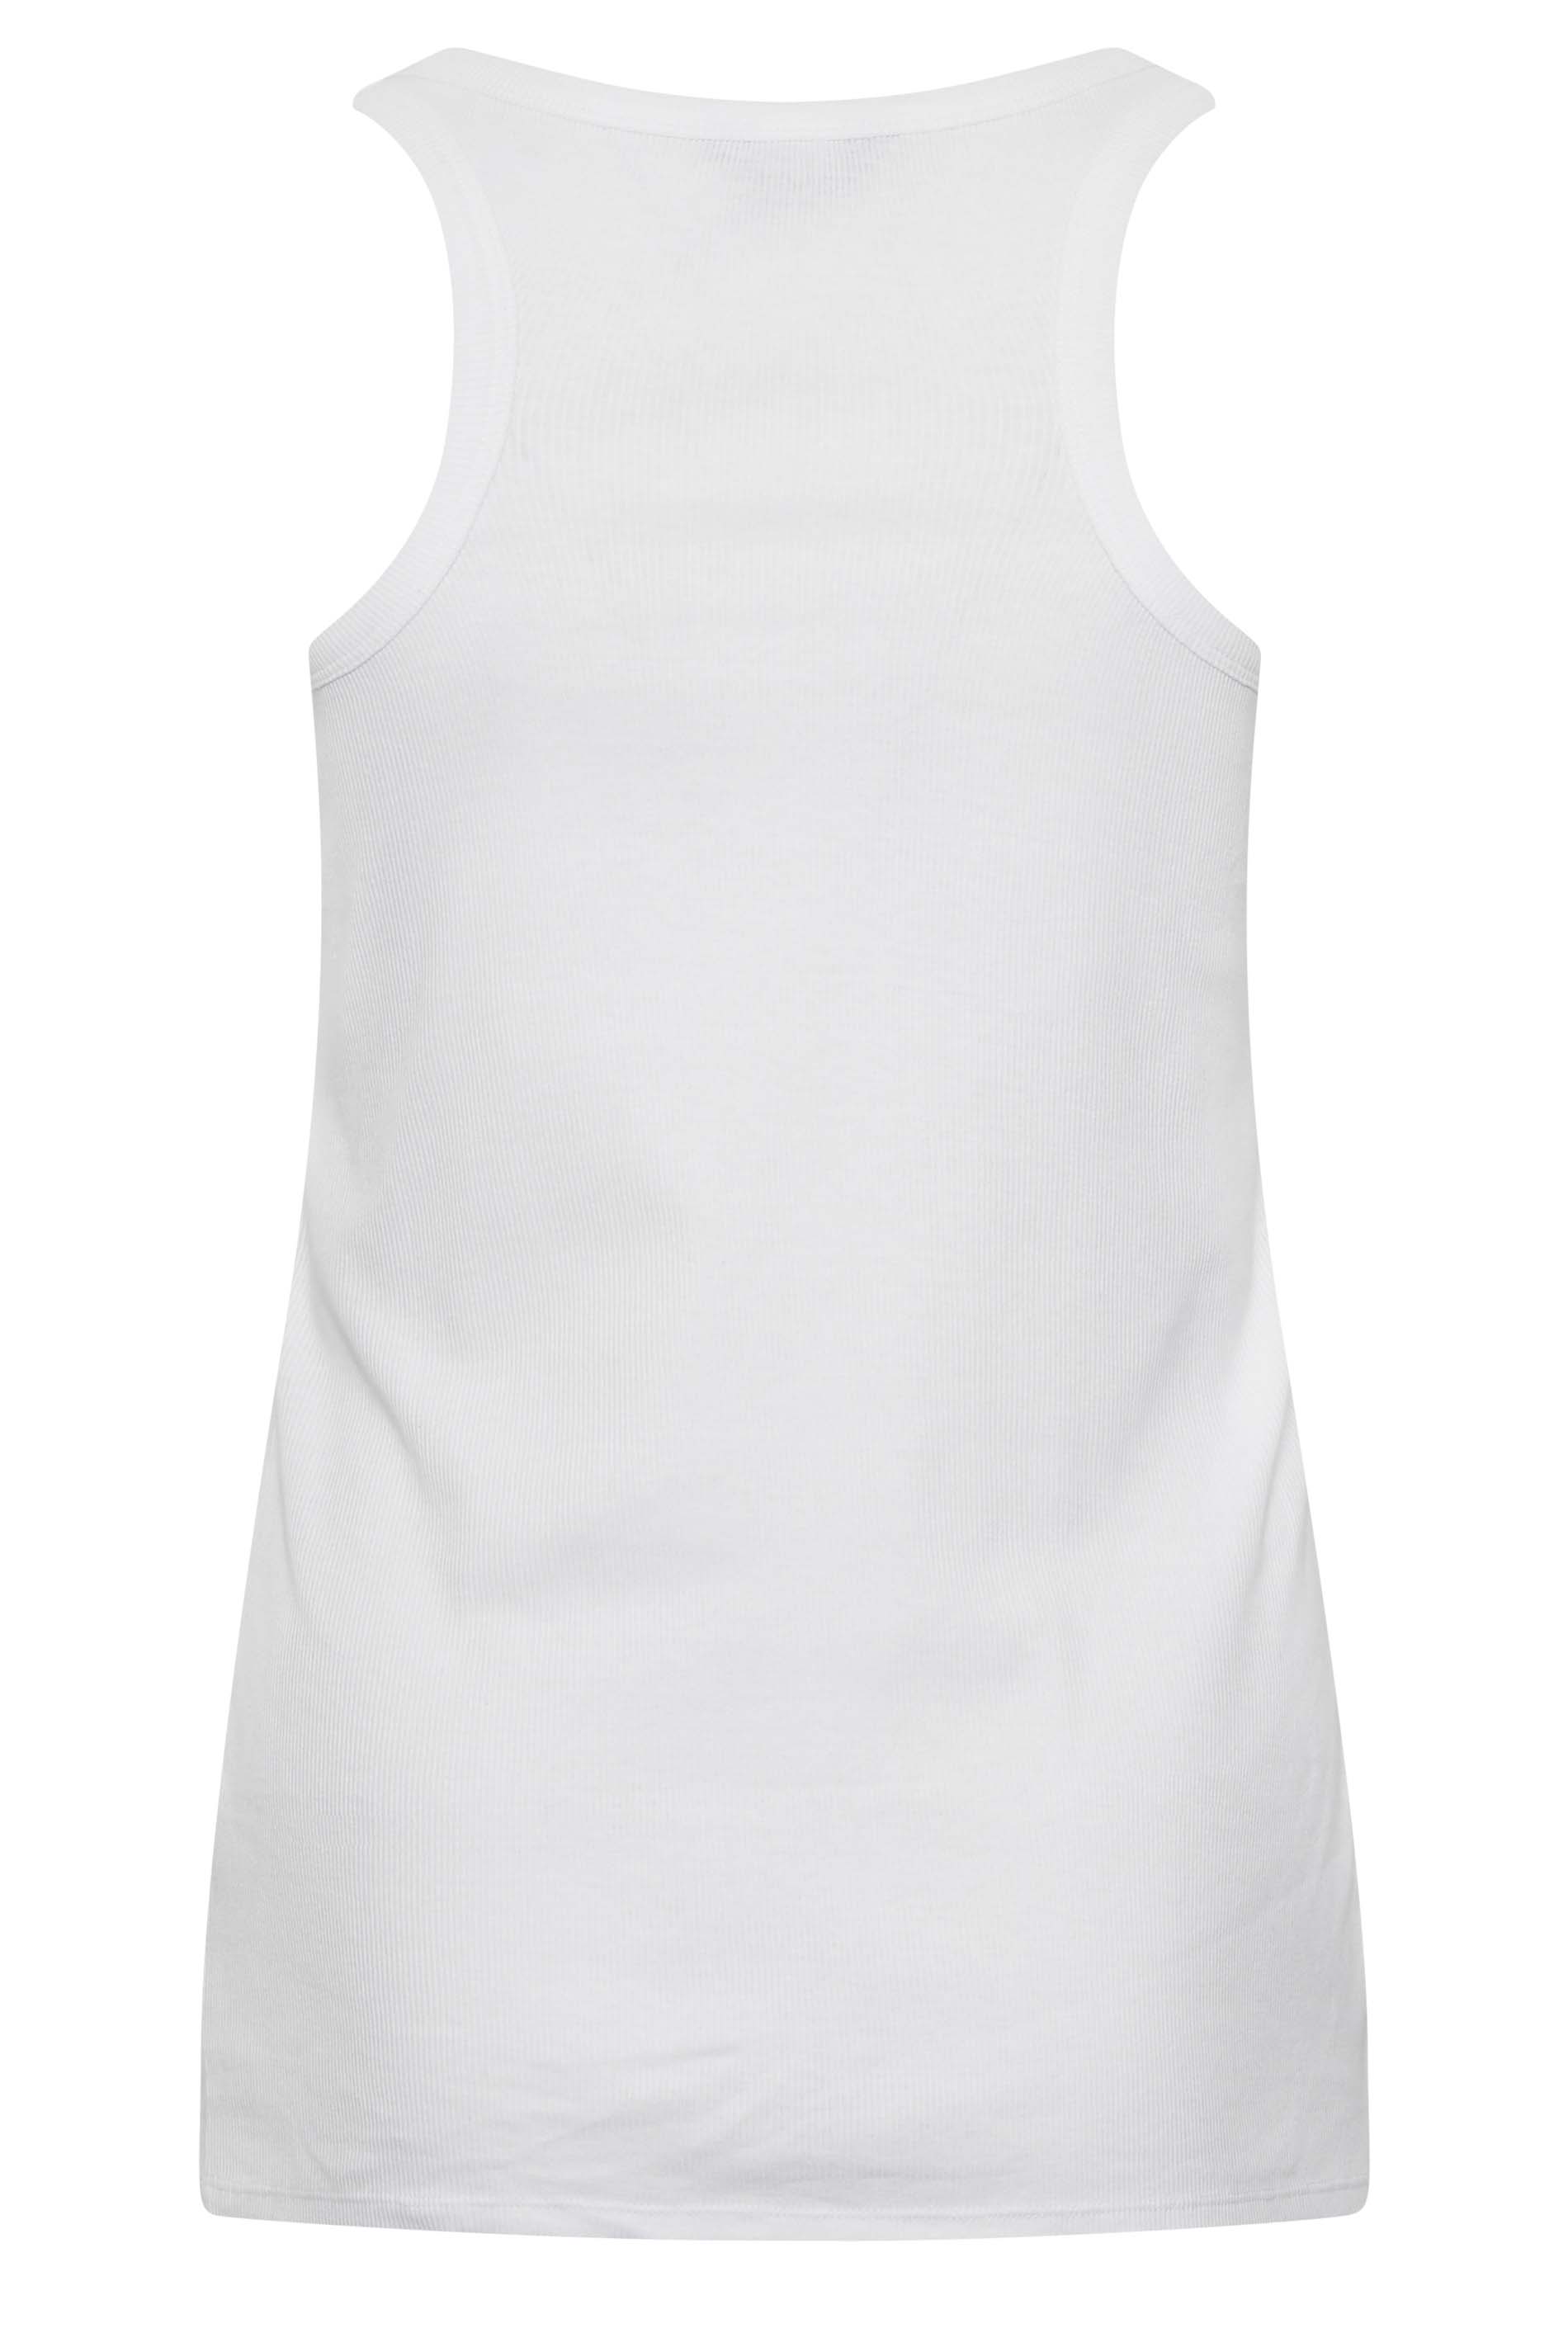 Buy Black Ribbed Racer Tank Vest Sleeveless Top from the Next UK online shop